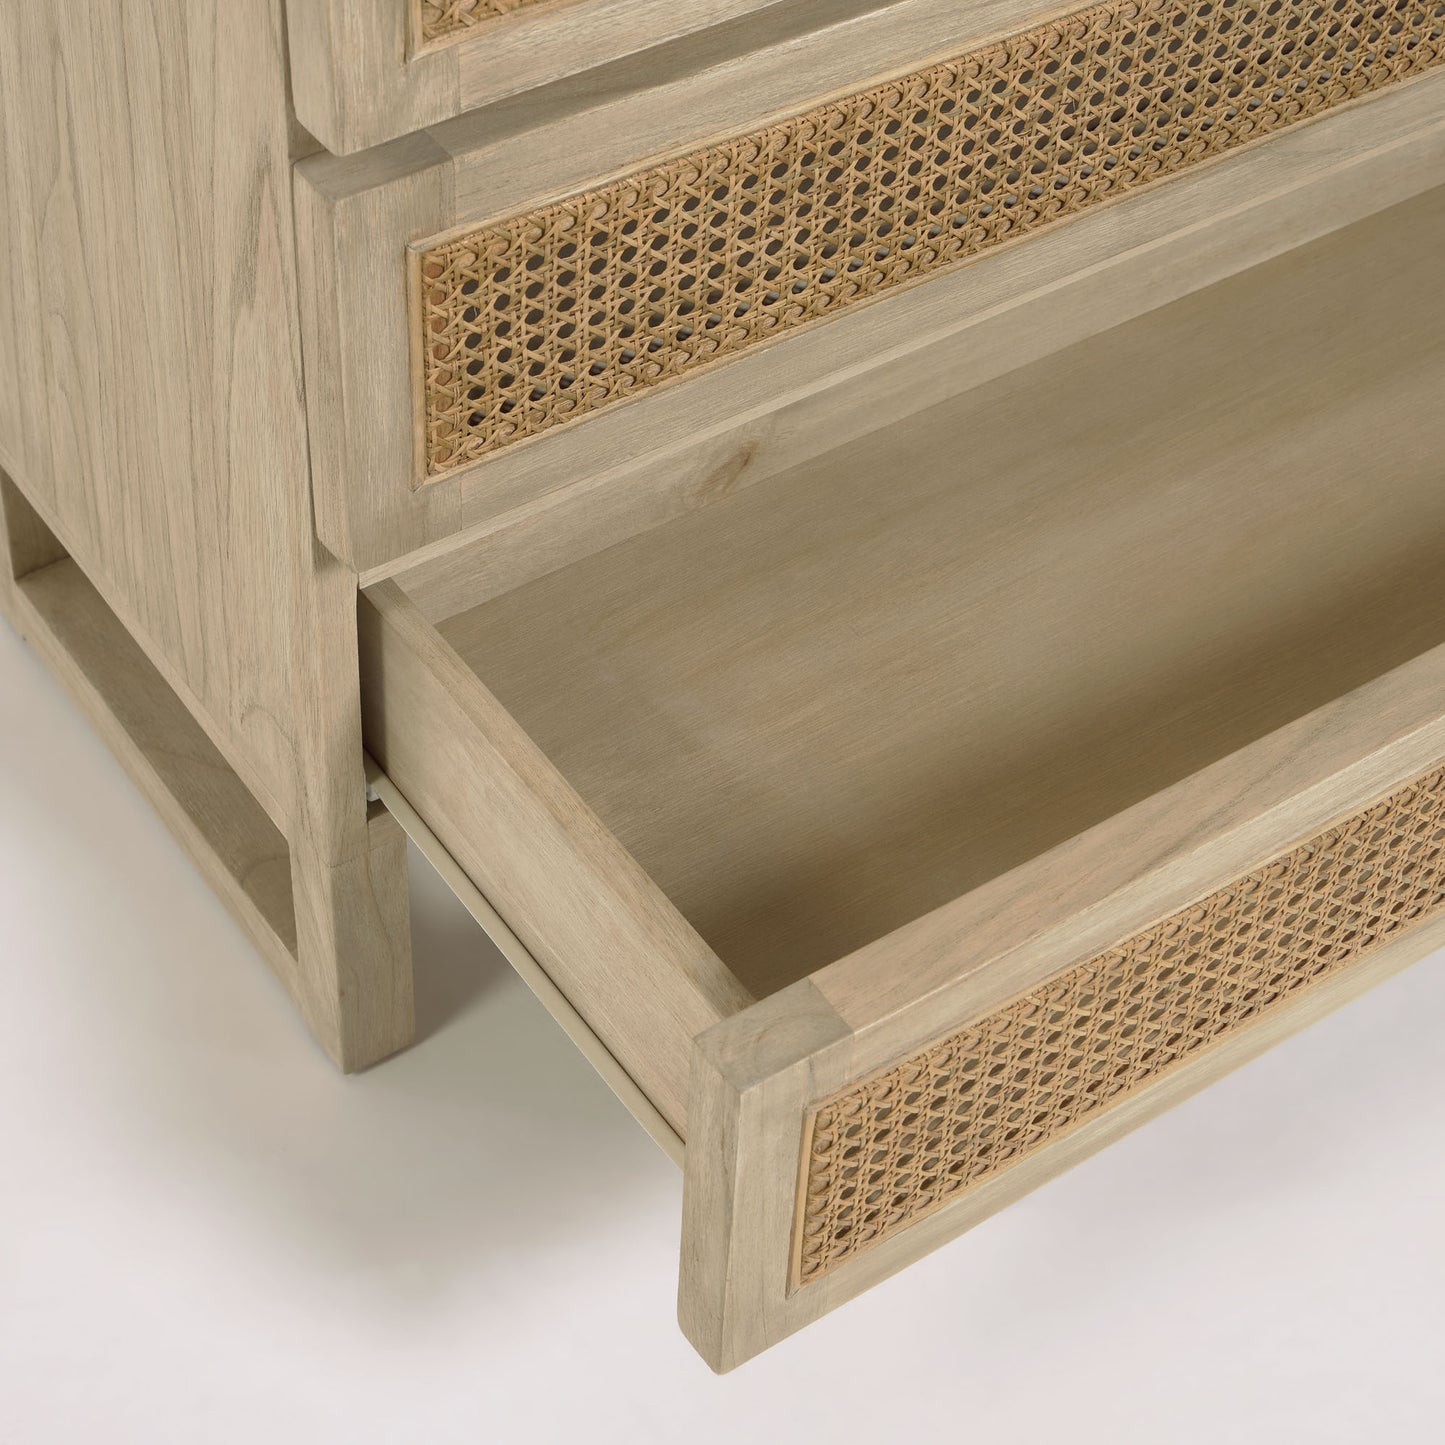 Rexit 4 Drawer Chest